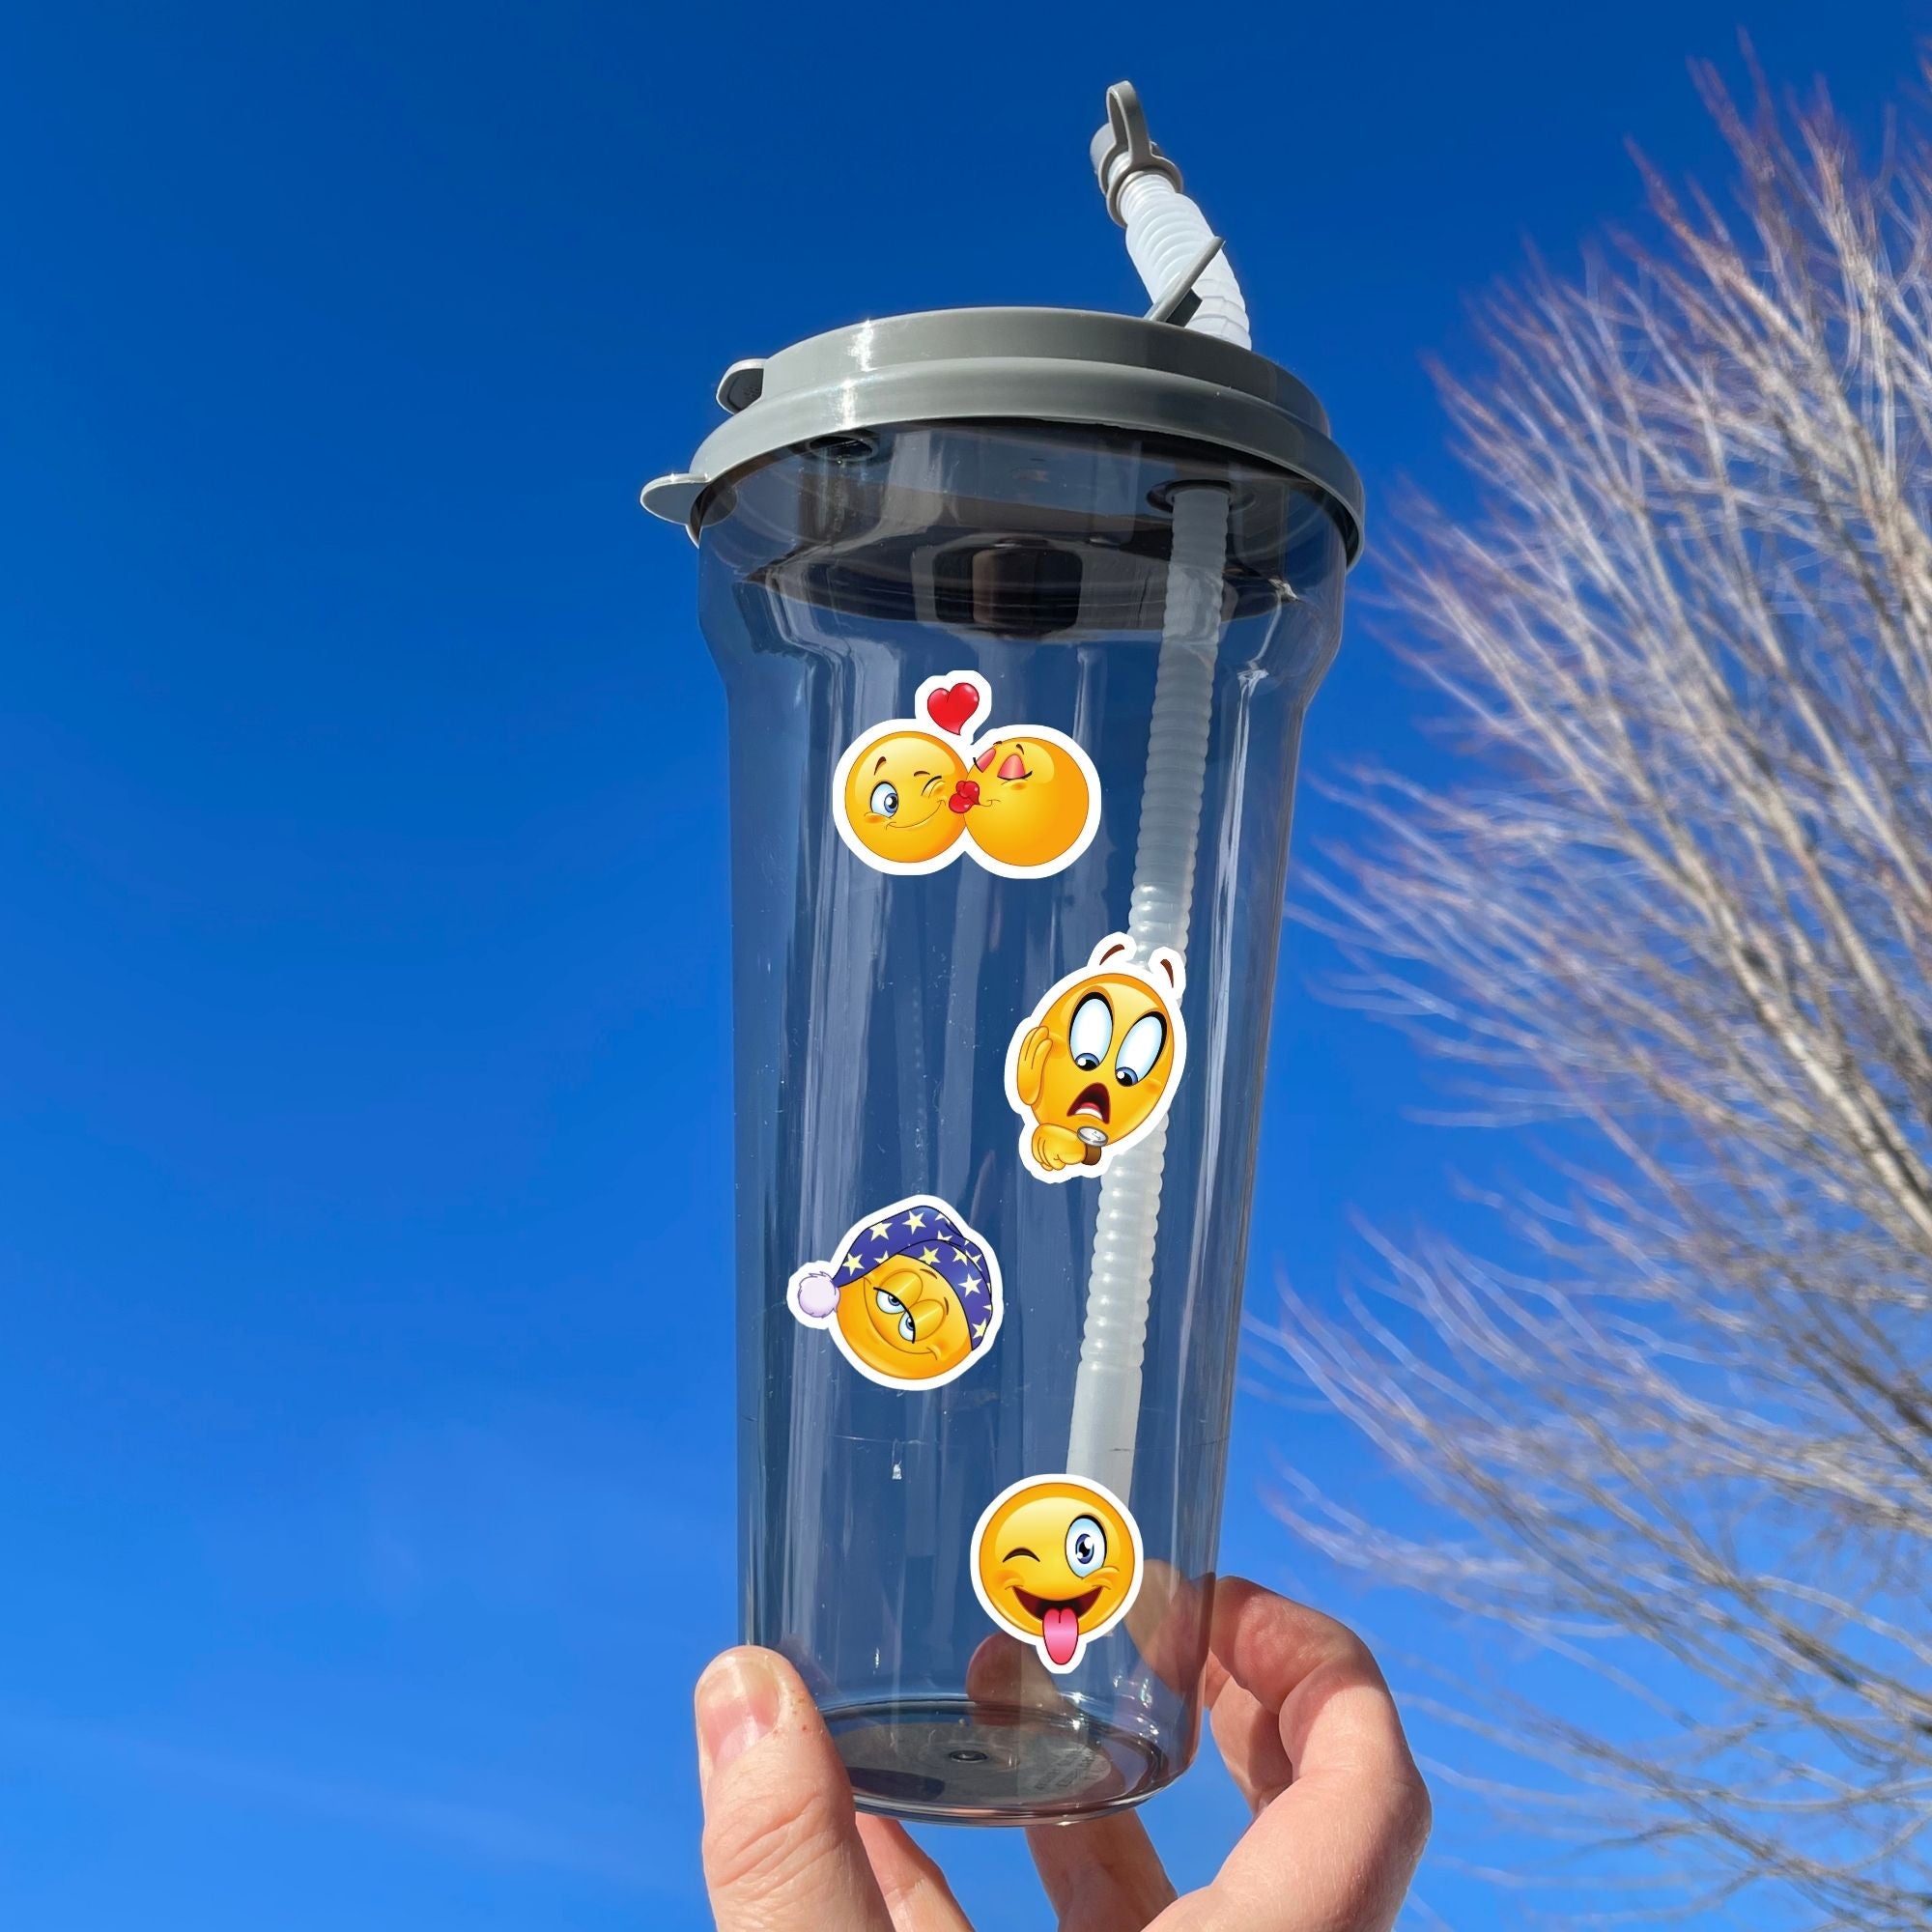 This image shows a water bottle with some of the Smiley stickers applied.